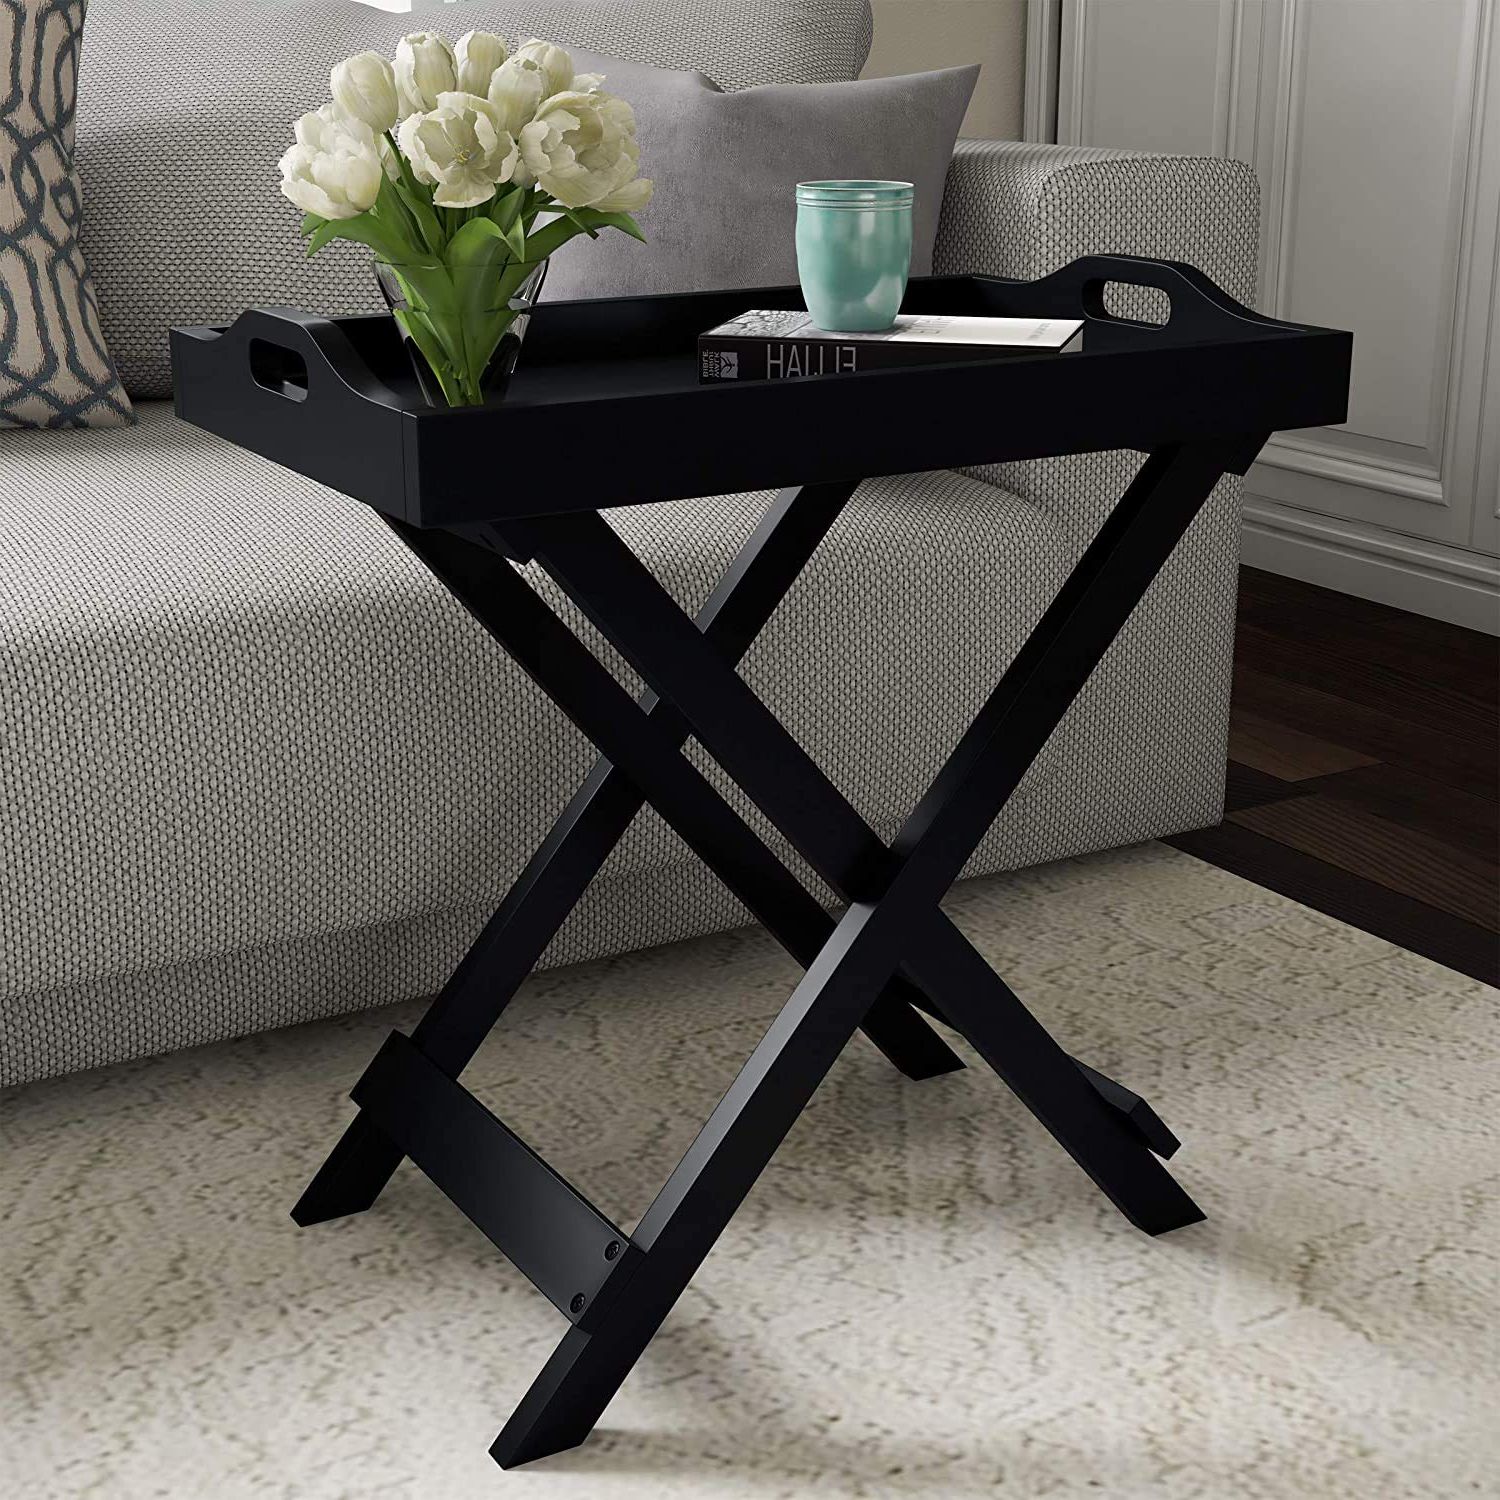 Fashionable Detachable Tray Coffee Tables In Foldable Coffee Table With Detachable Tray (View 6 of 15)